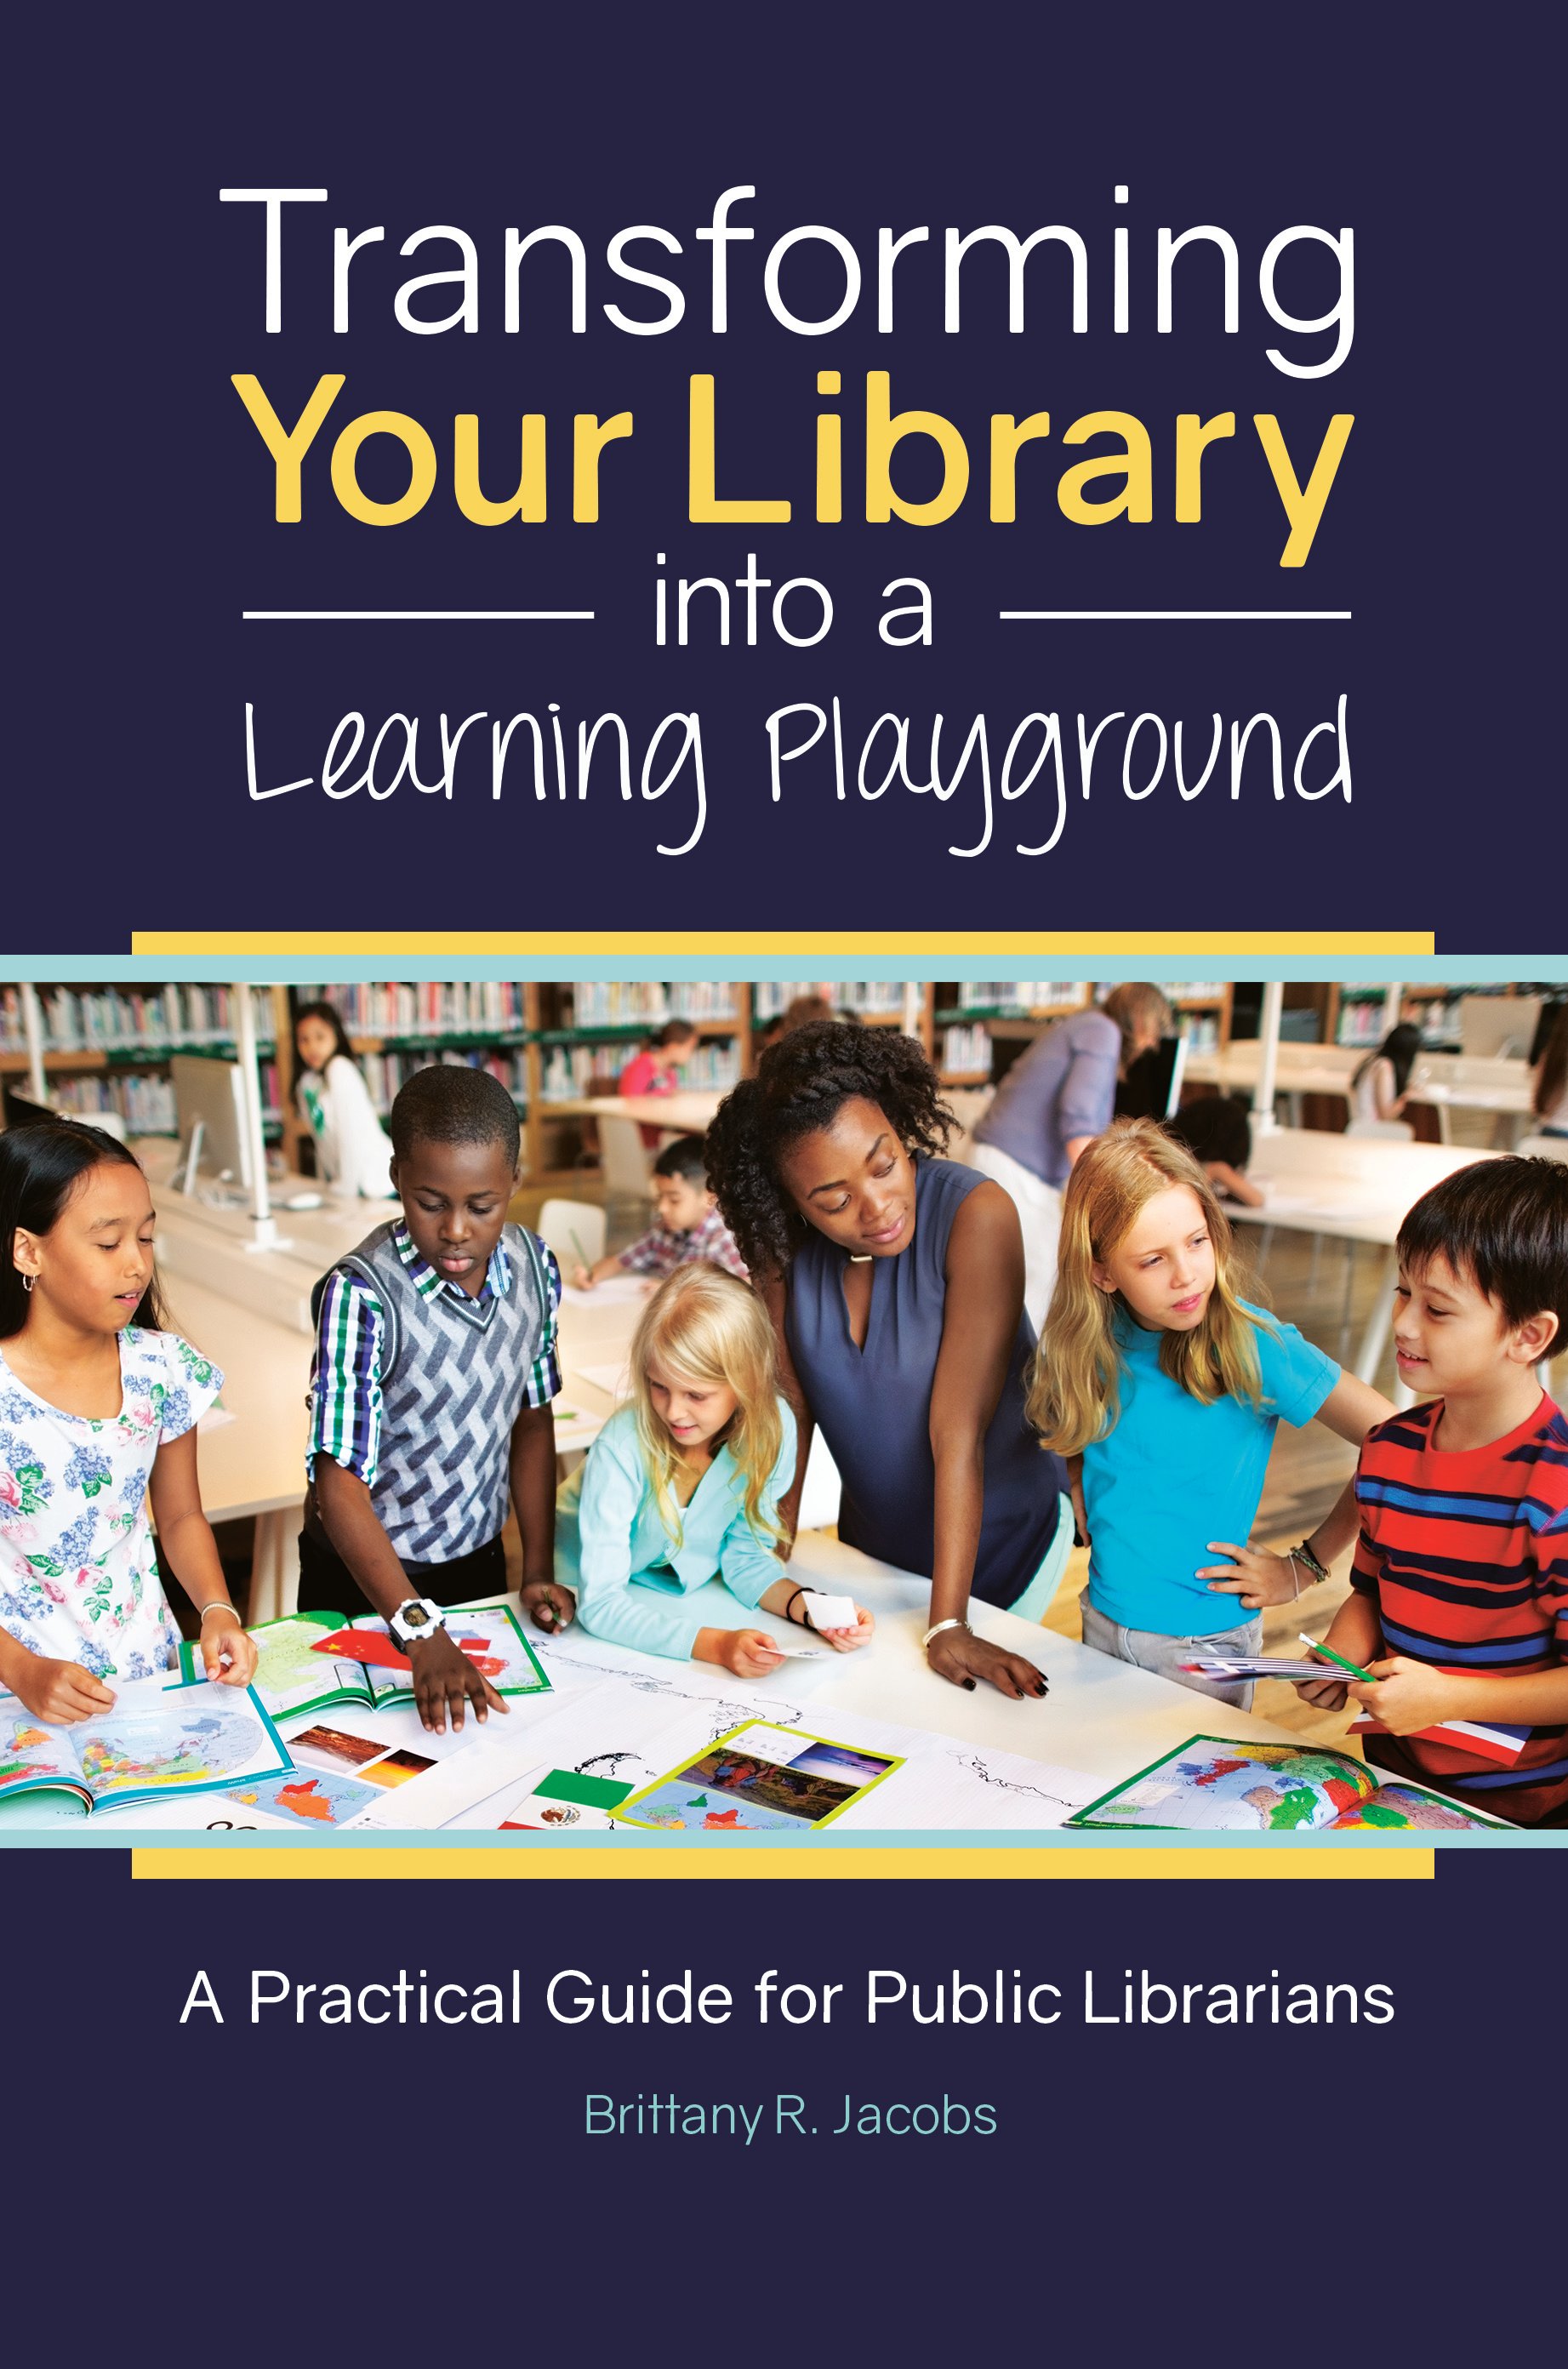 Webinar: Transforming Your Library into a learning playground